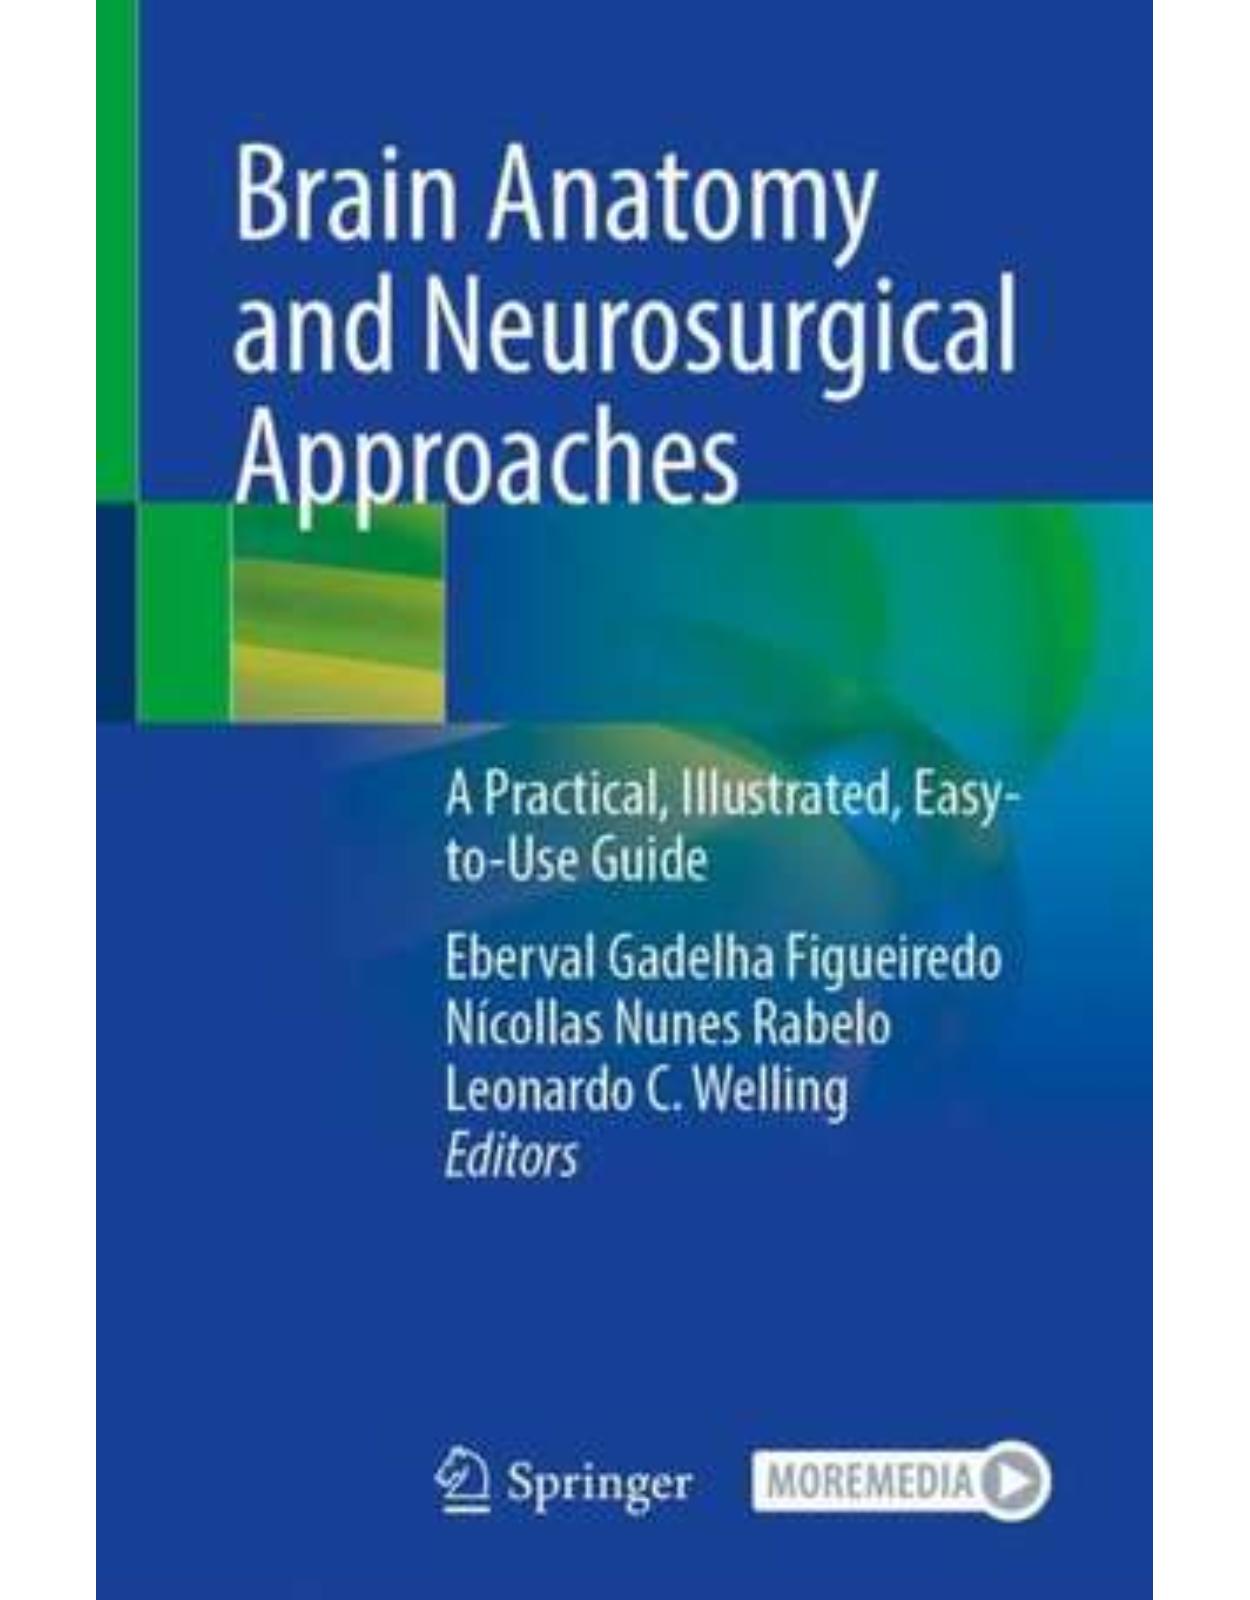 Brain Anatomy and Neurosurgical Approaches : A Practical, Illustrated, Easy-to-Use Guide